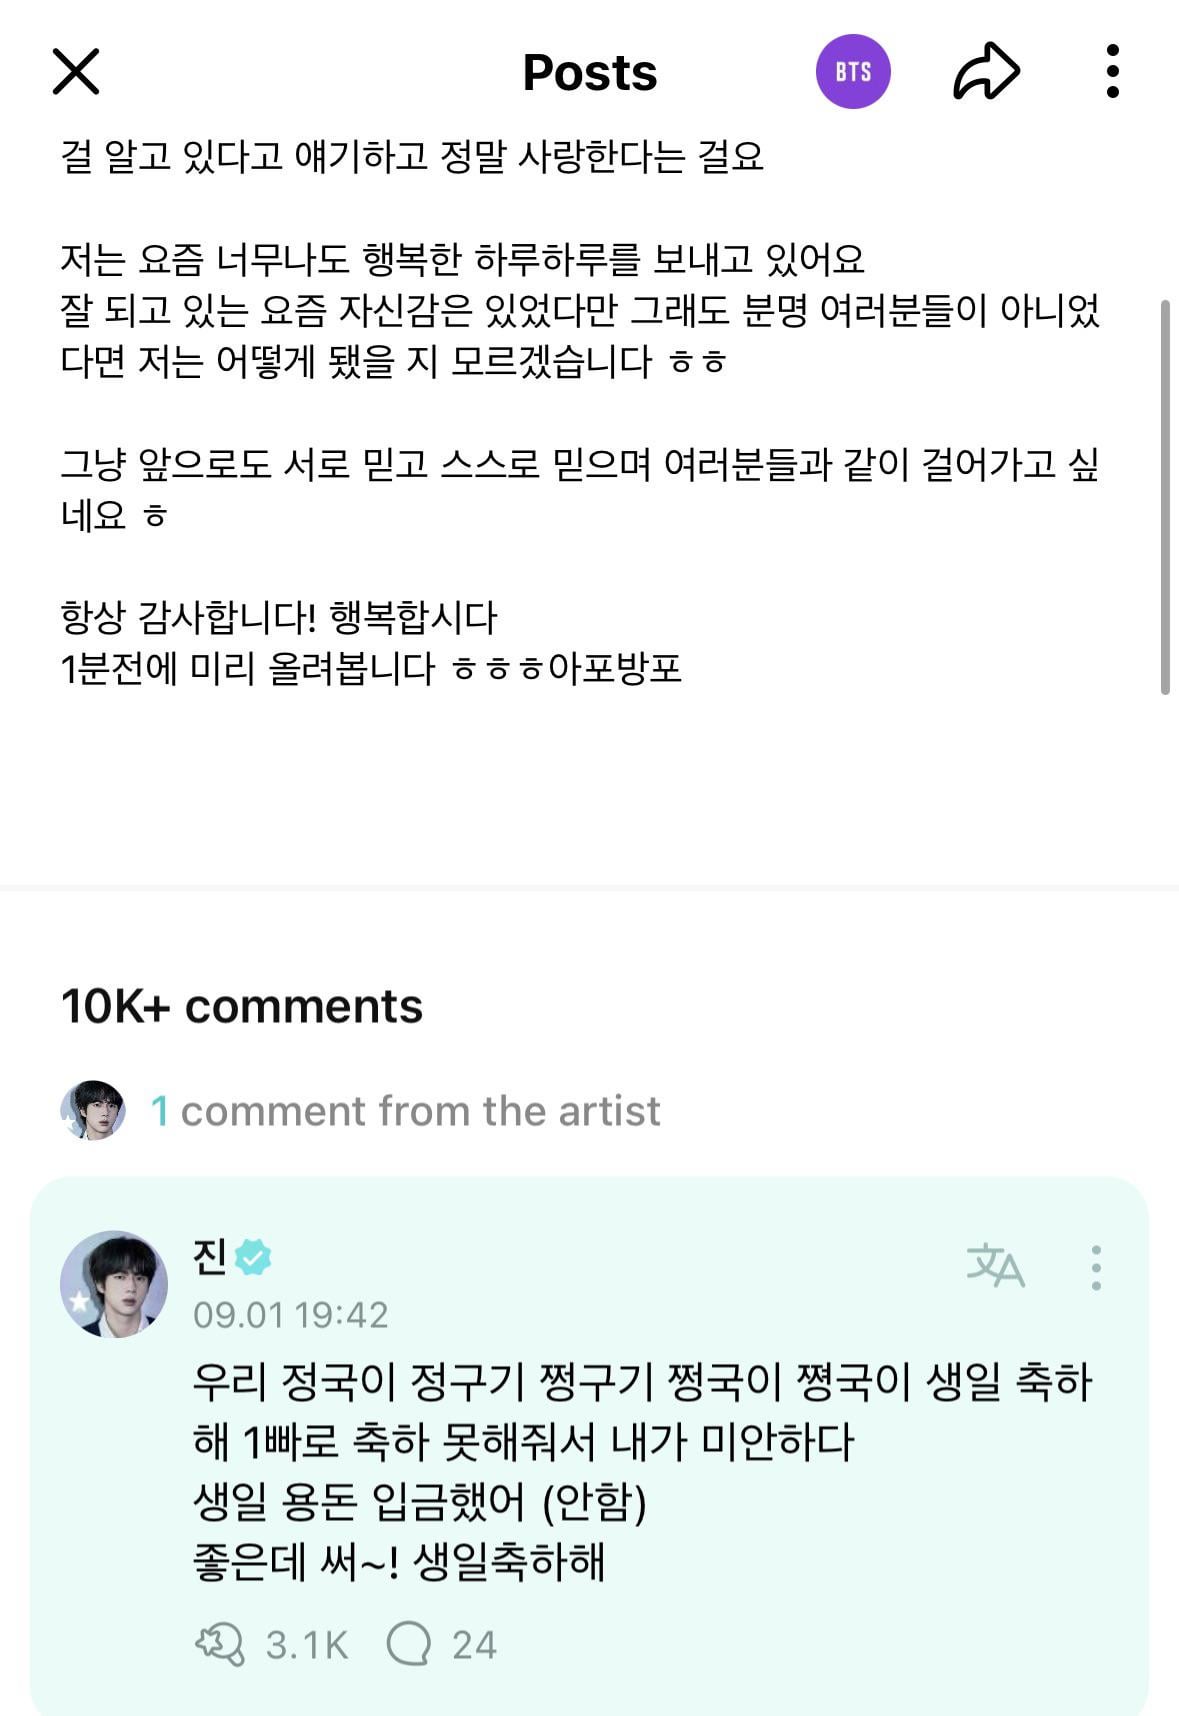 Jin’s comment on Jungkook’s Weverse post 010923